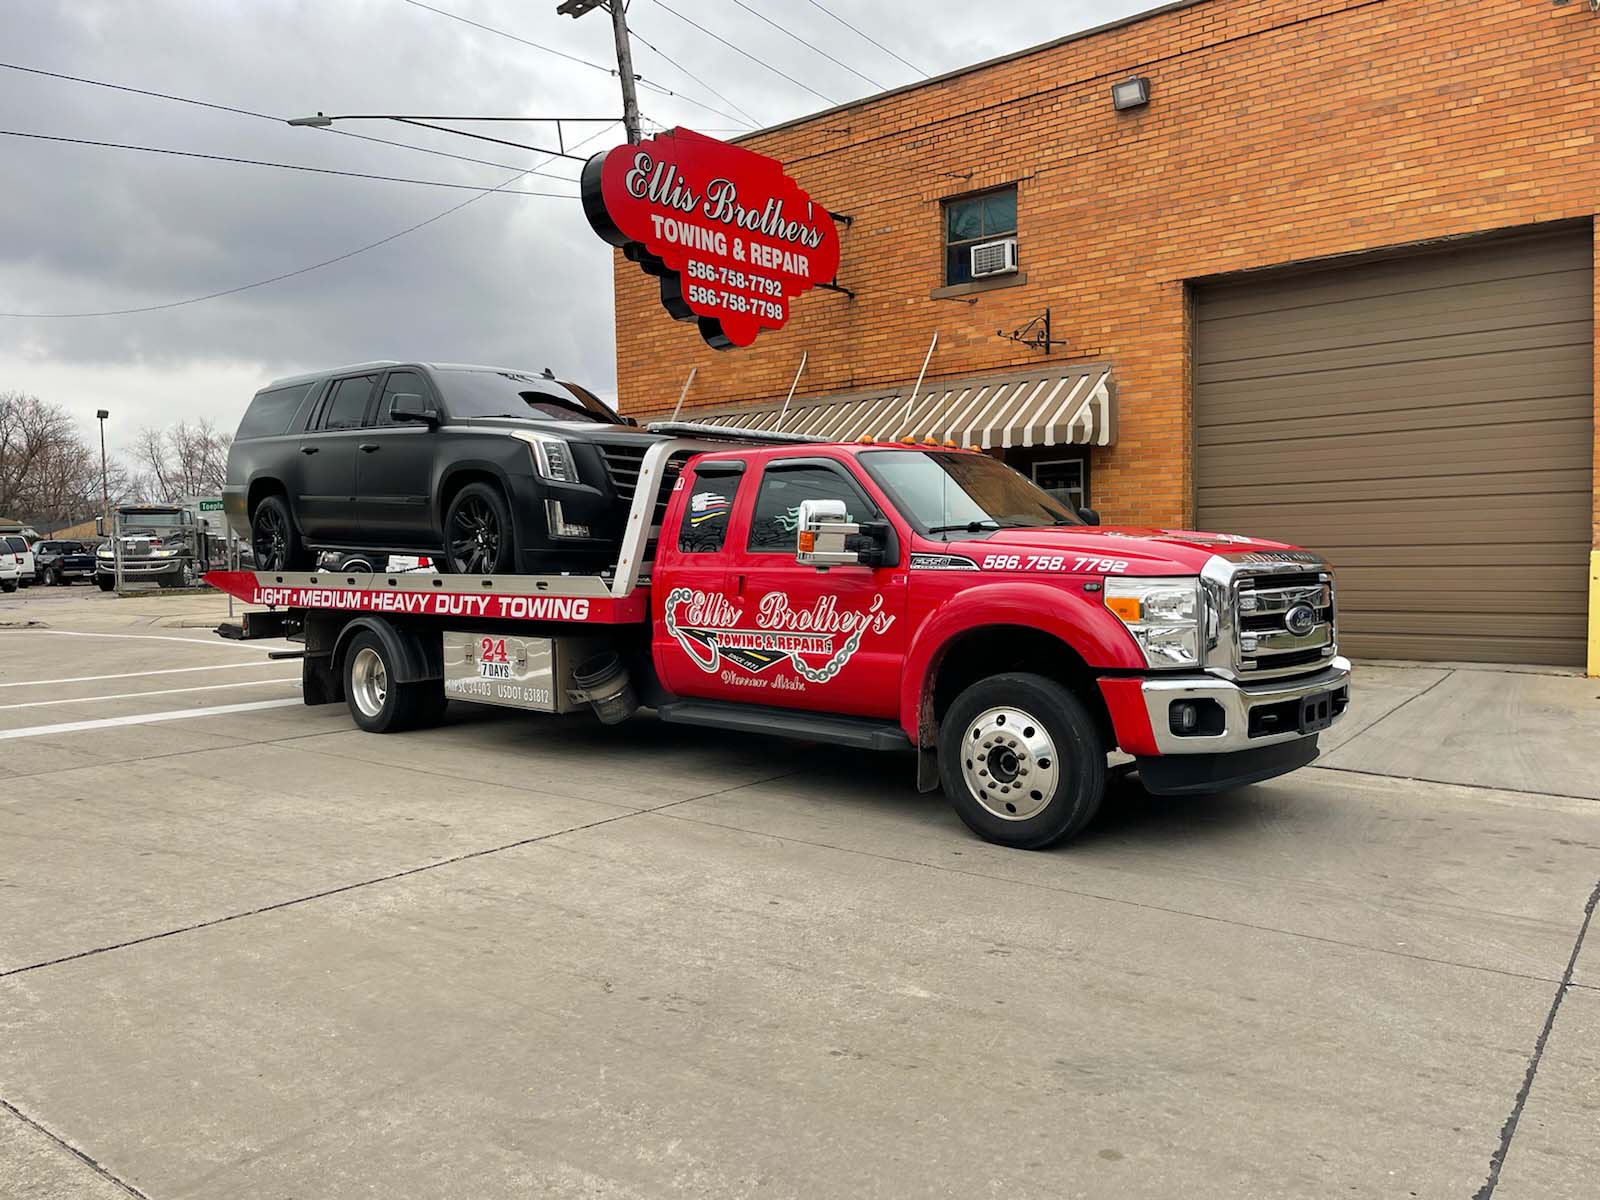 Ellis Brothers Towing & Repair Client Provided (13)